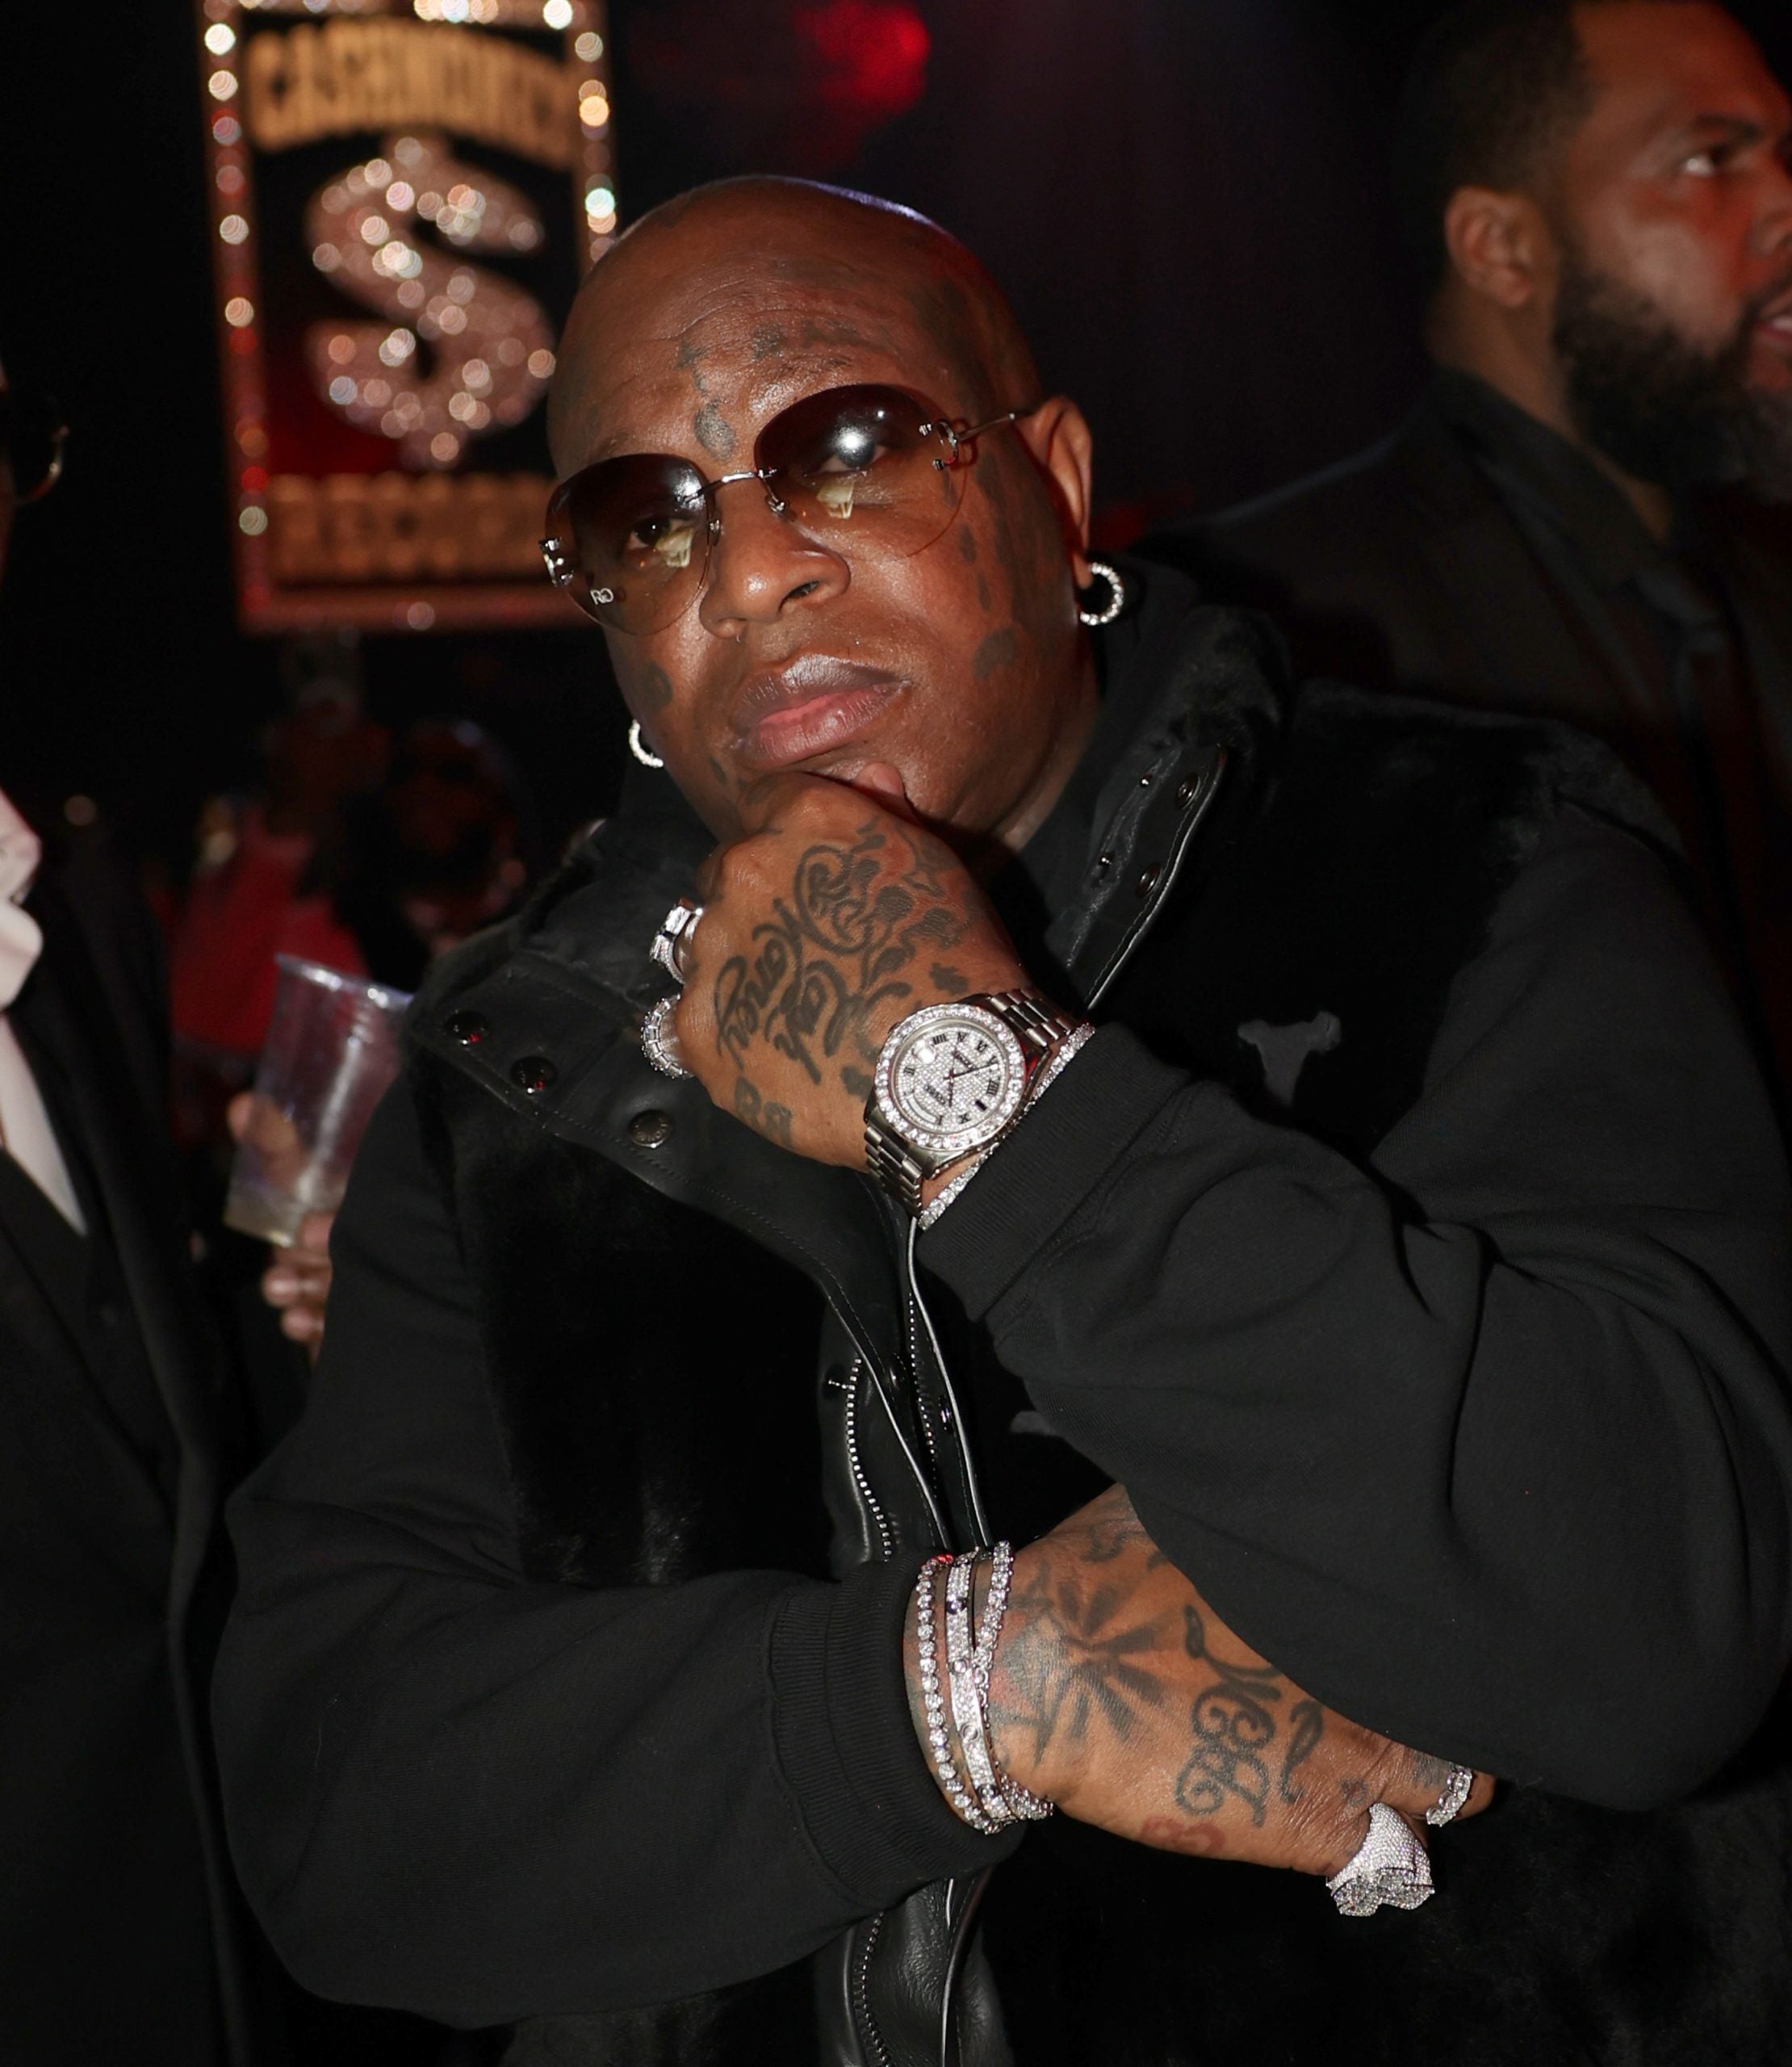 Birdman And Slim Williams To Be Honored At YouTube’s Leaders And Legends Gala